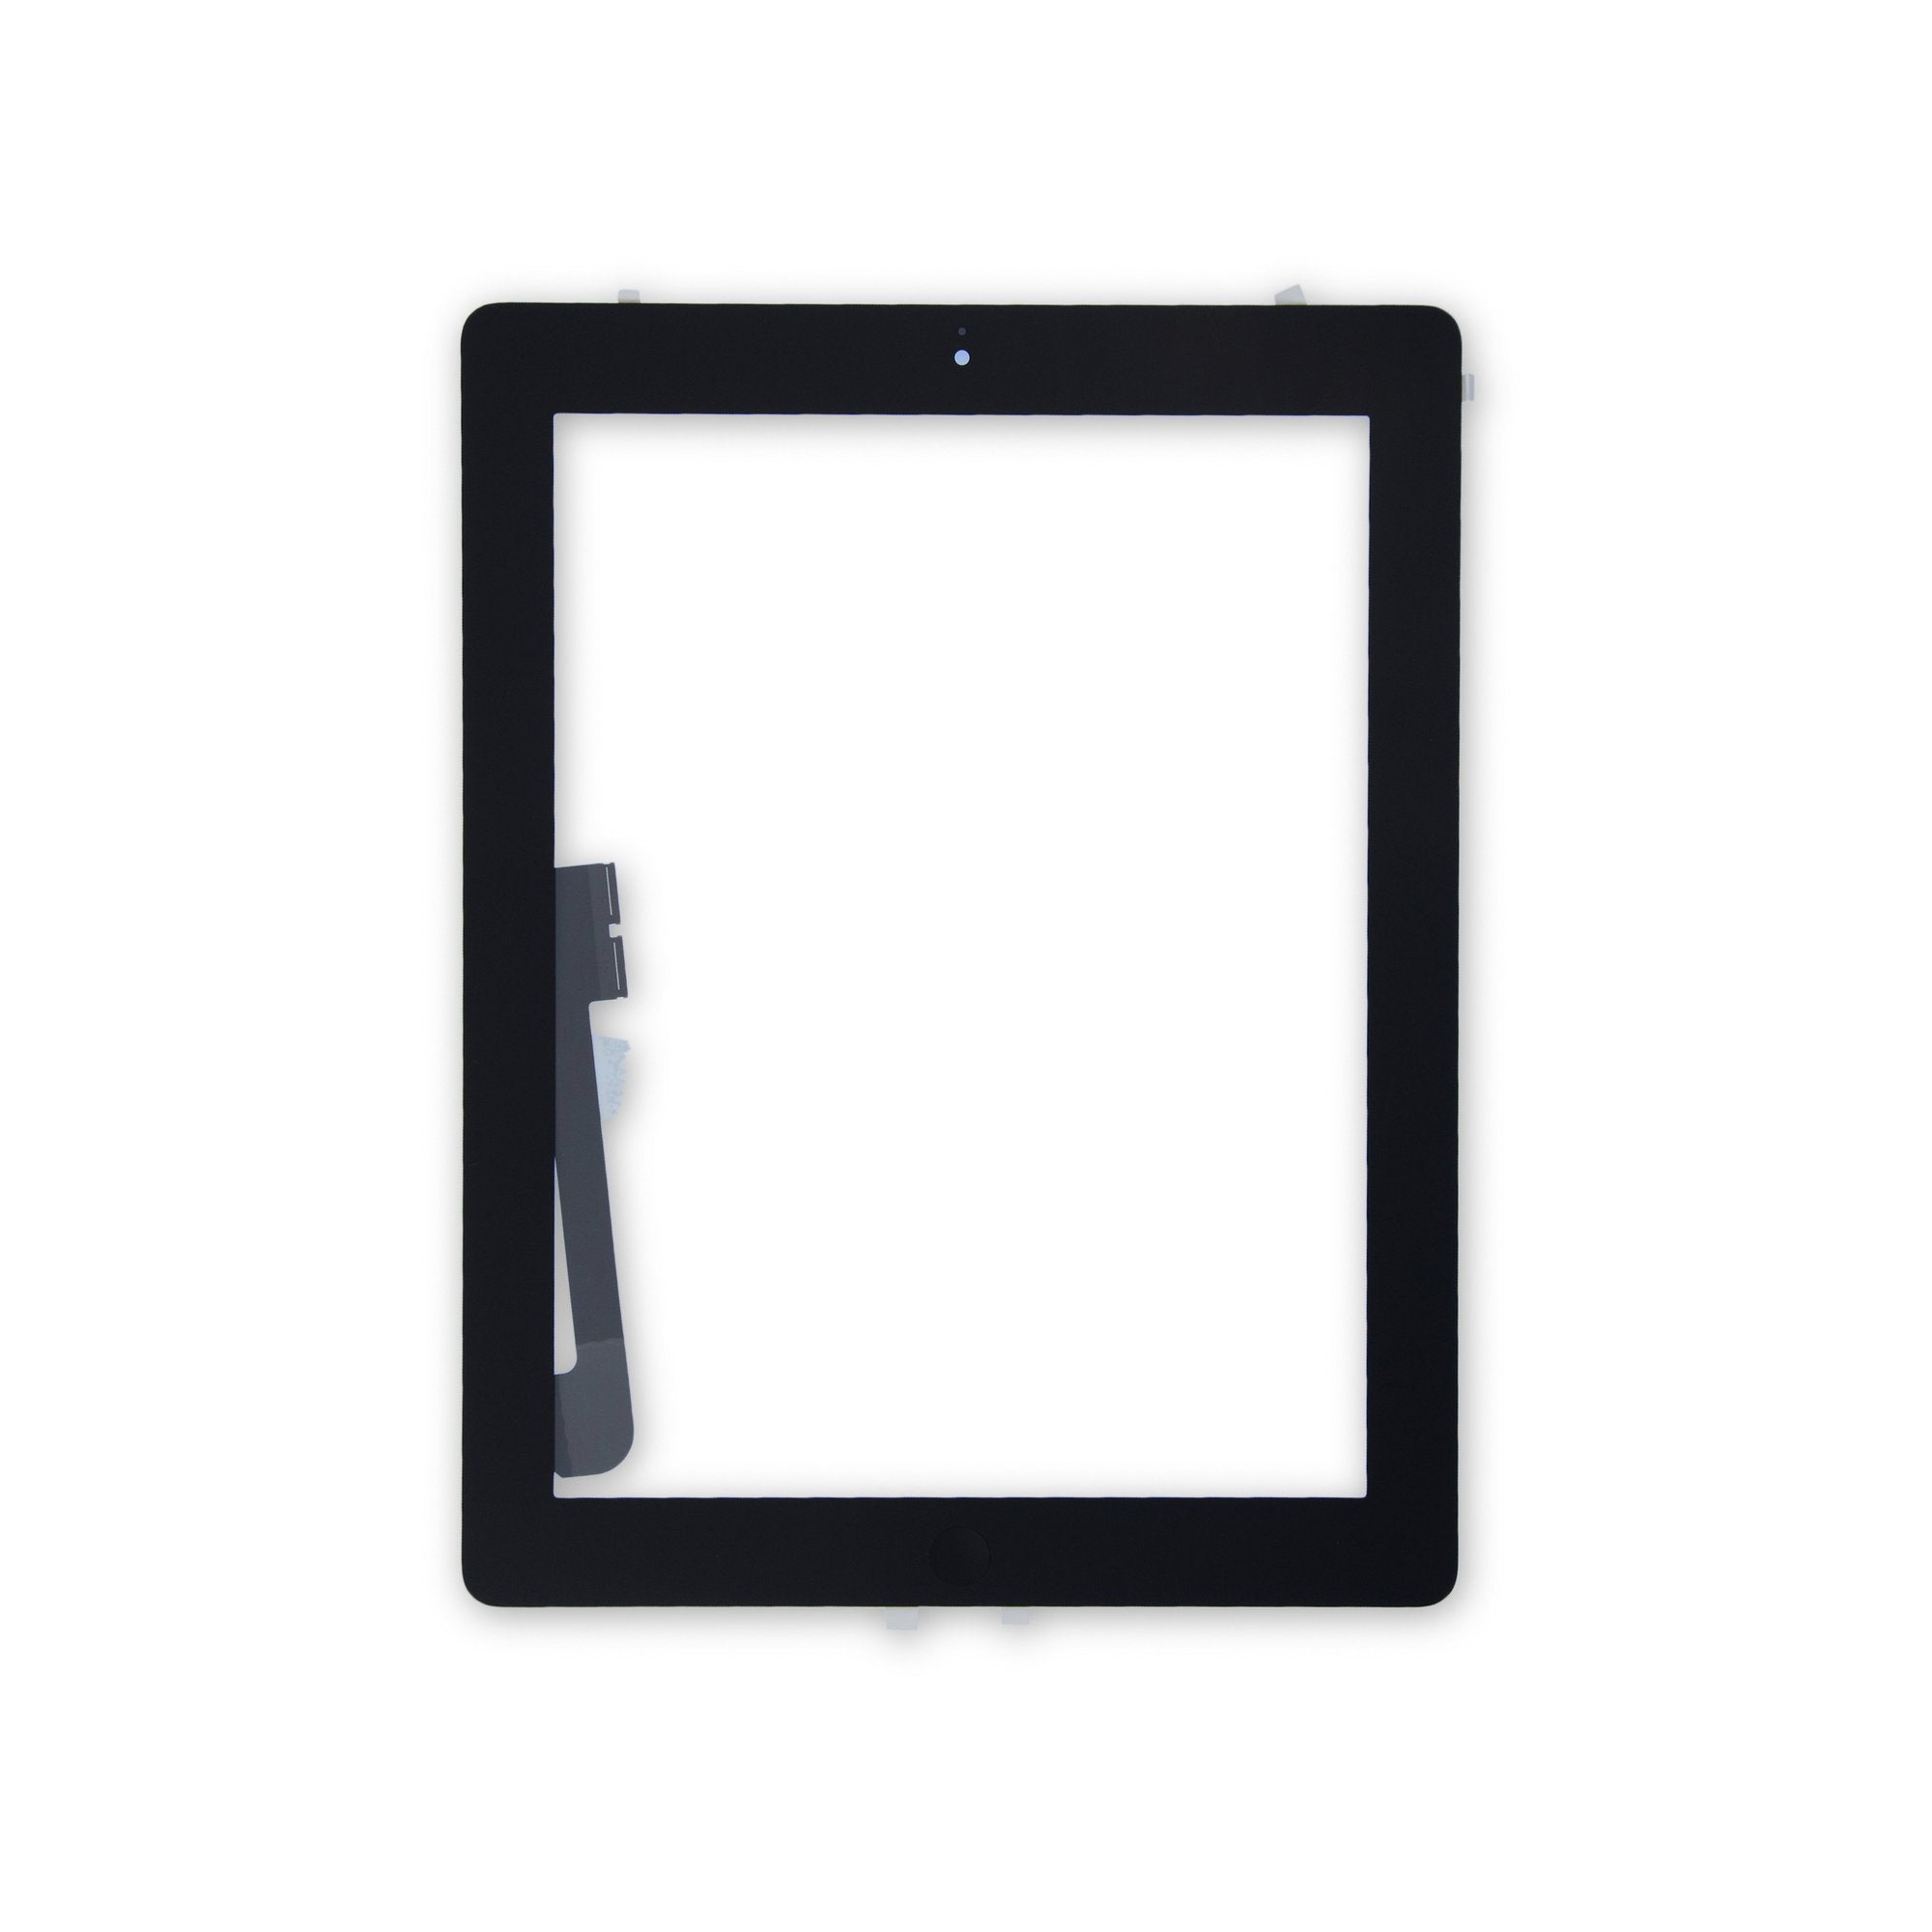 iPad 3 Screen Digitizer Assembly Black New Part Only